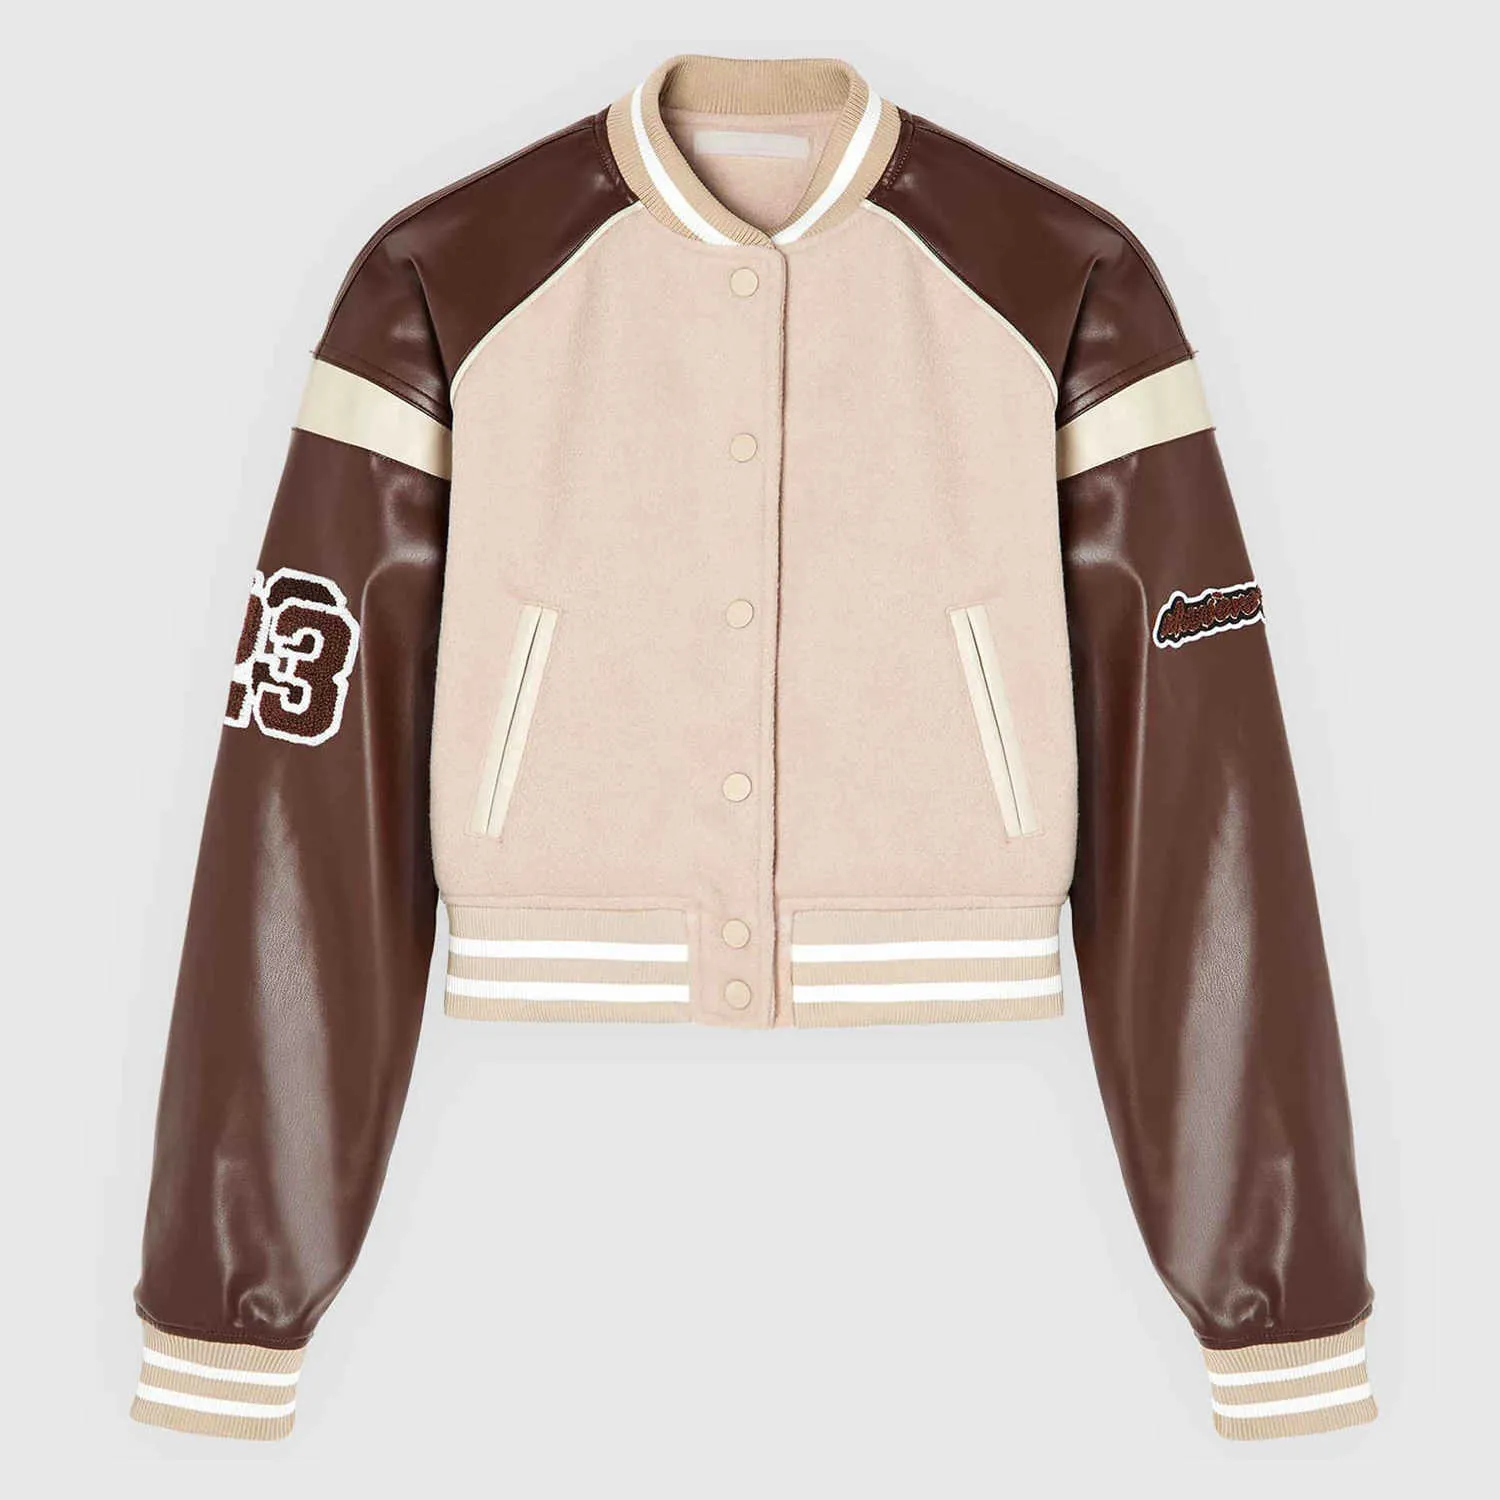 Womens Varsity Jackets Letterman Turn Down Shoulder Baseball College Jacket Price with Genuine Leather